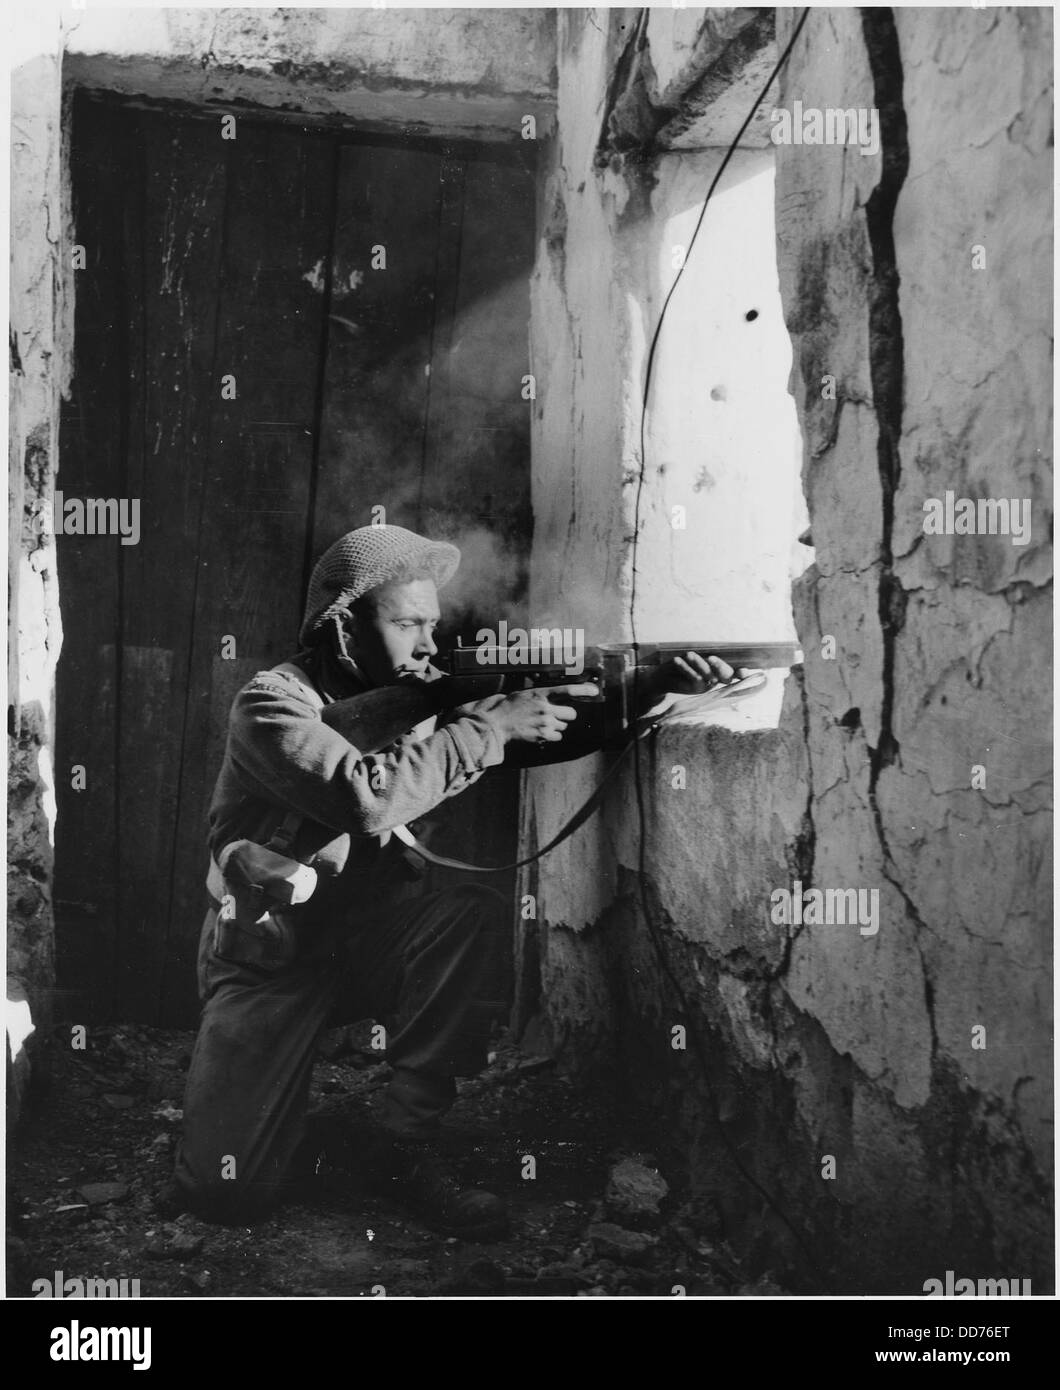 A sniper in the town of Cupa, Italy - - 196316 Stock Photo